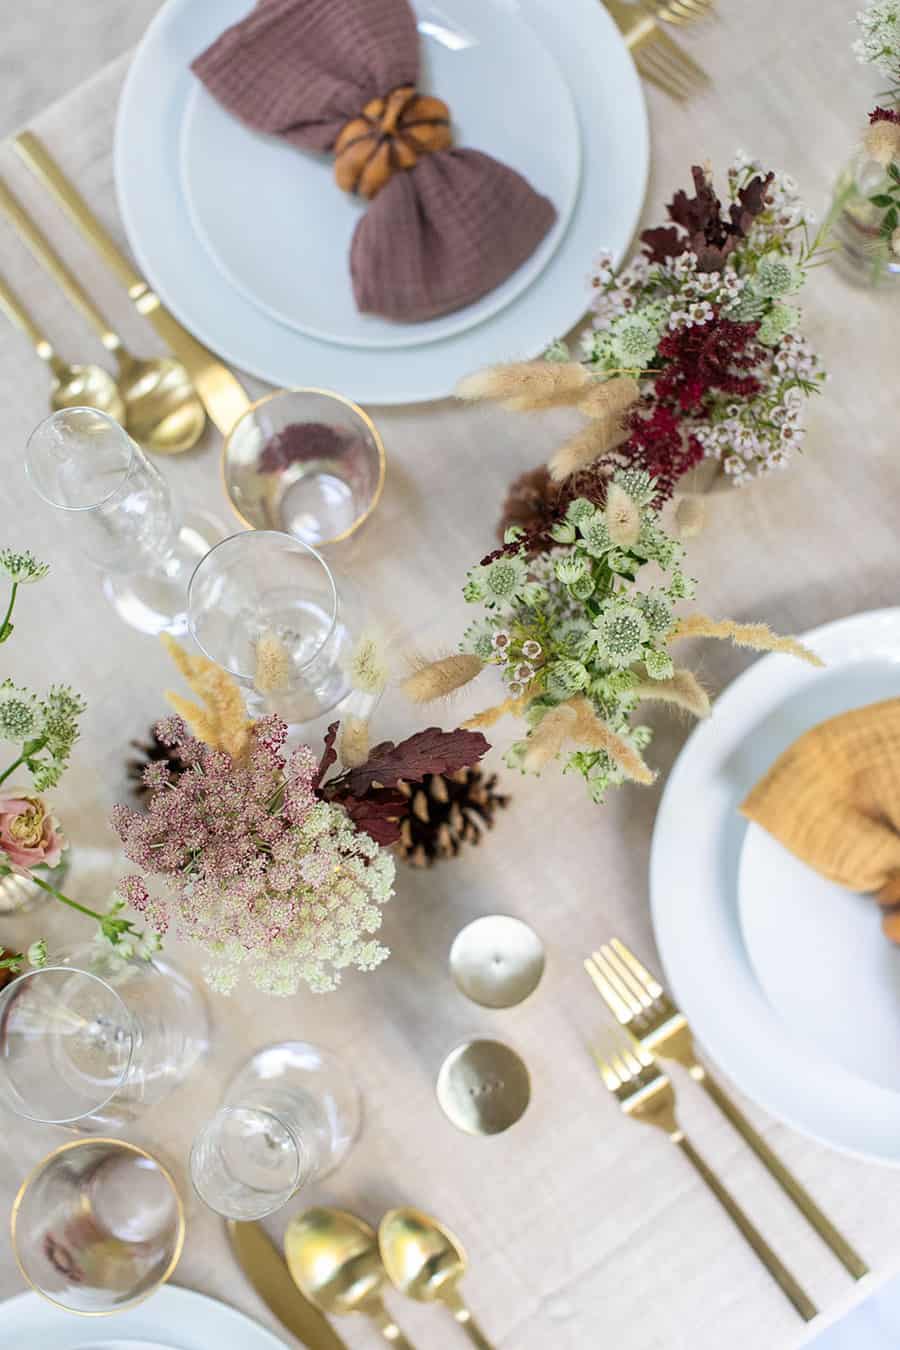 Flowers, fold flatware and pretty napkins for a Thanksgiving table setting.